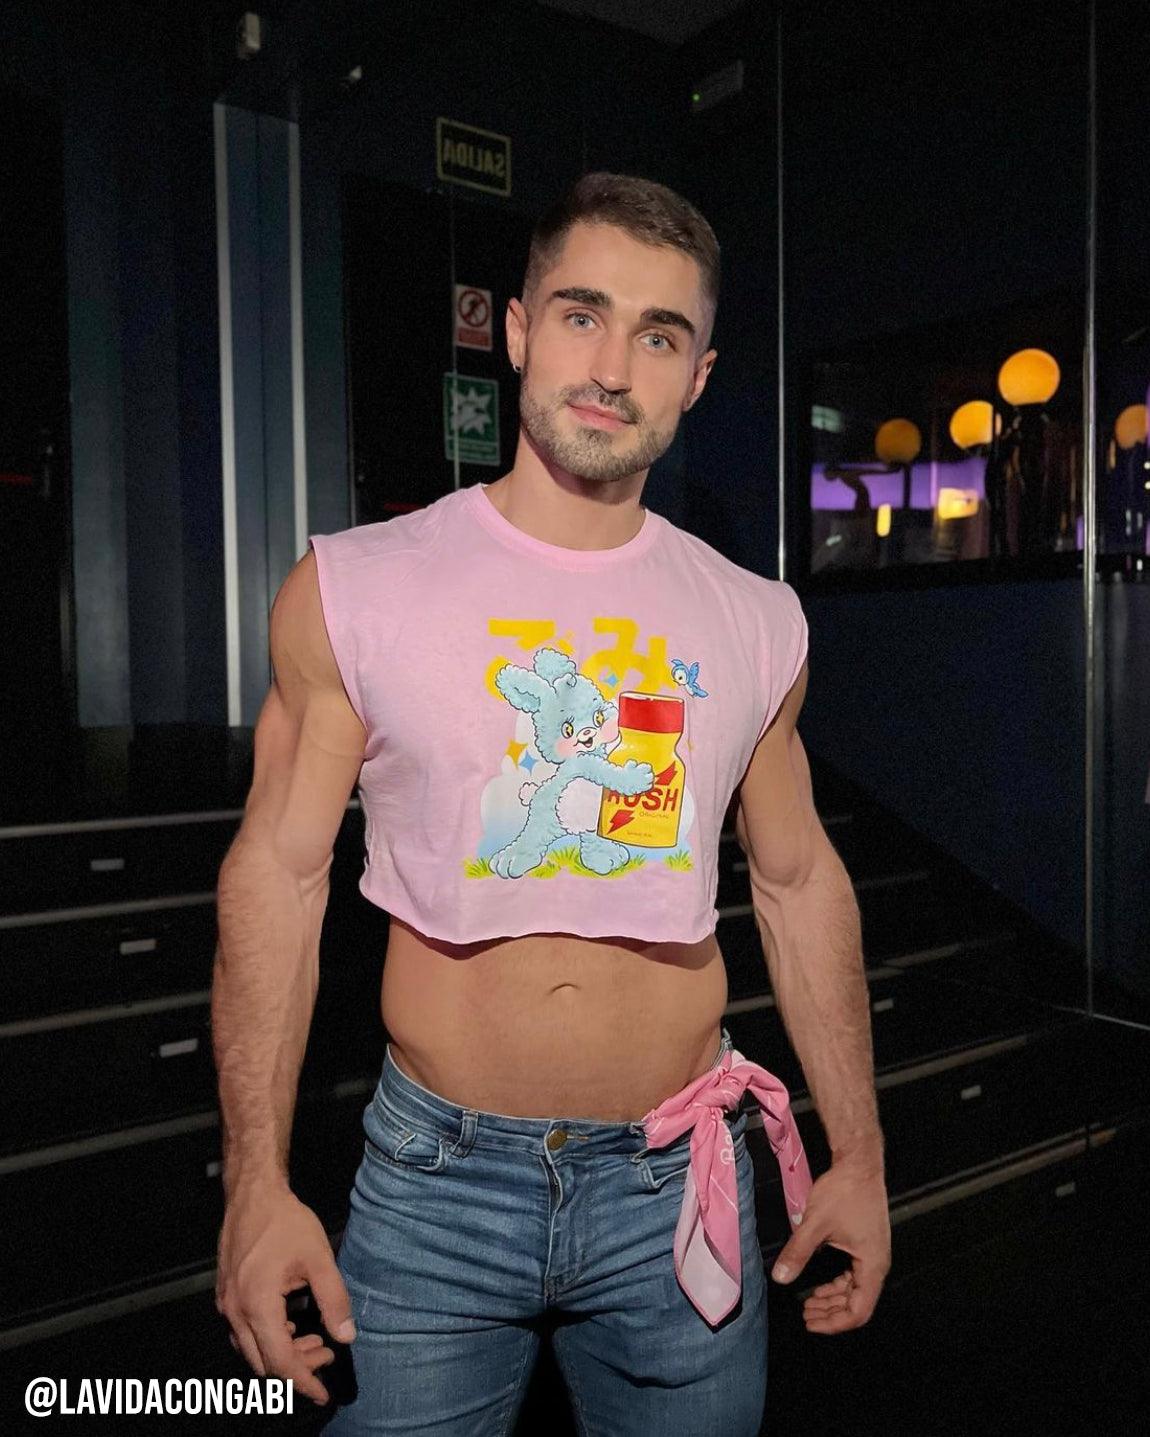 This little bunny loves his Rush on pink - mens sleeveless crop top.